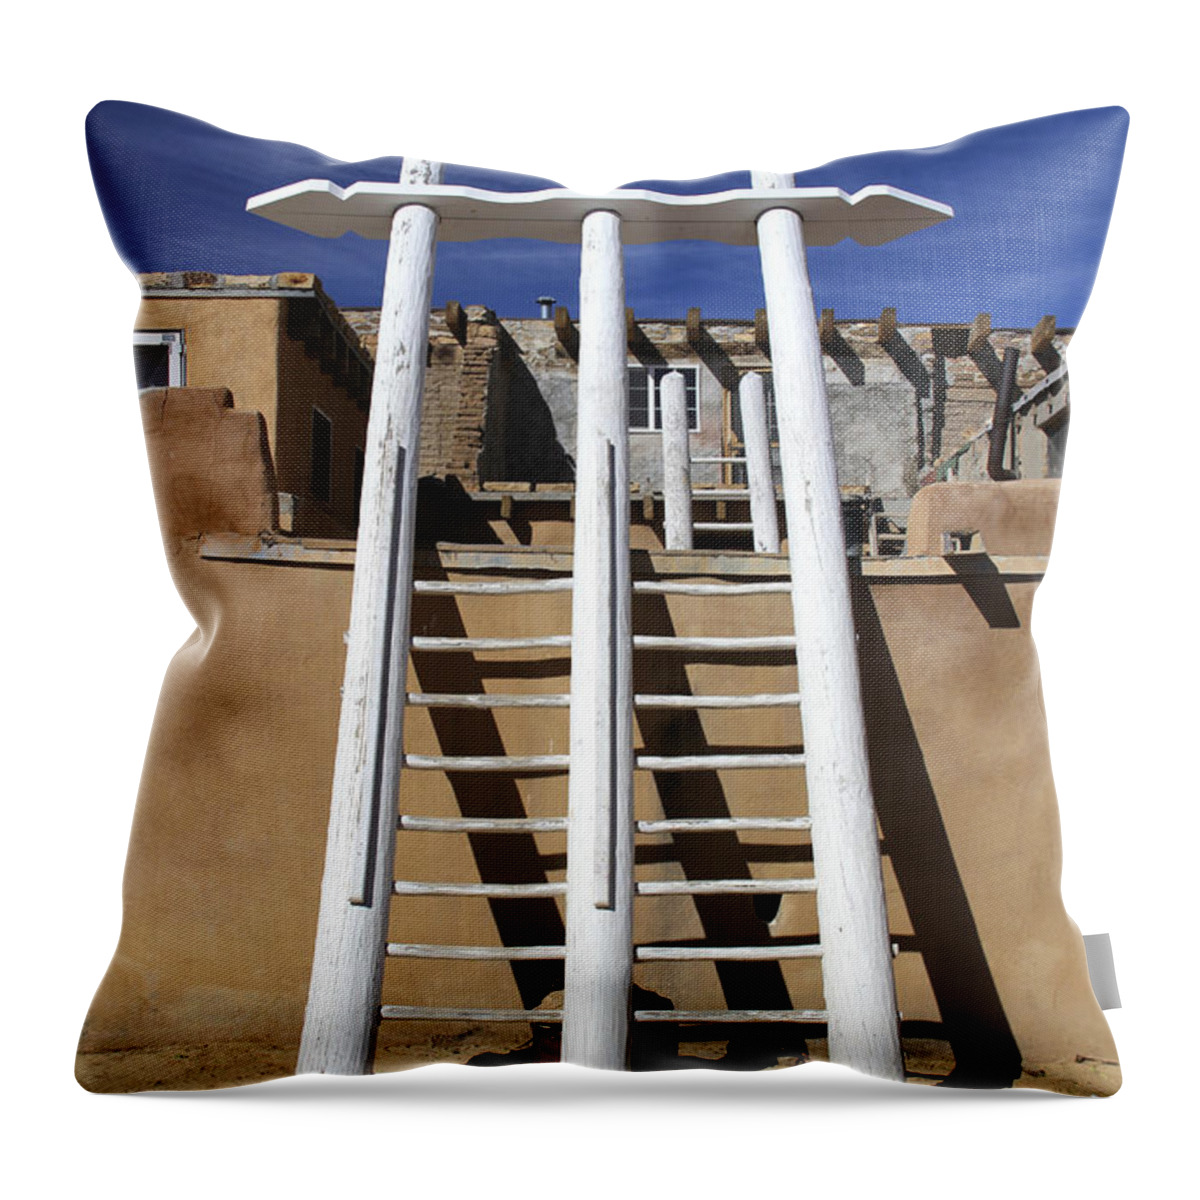 Acoma Pueblo Throw Pillow featuring the photograph The Ladder Acoma Pueblo by Mike McGlothlen